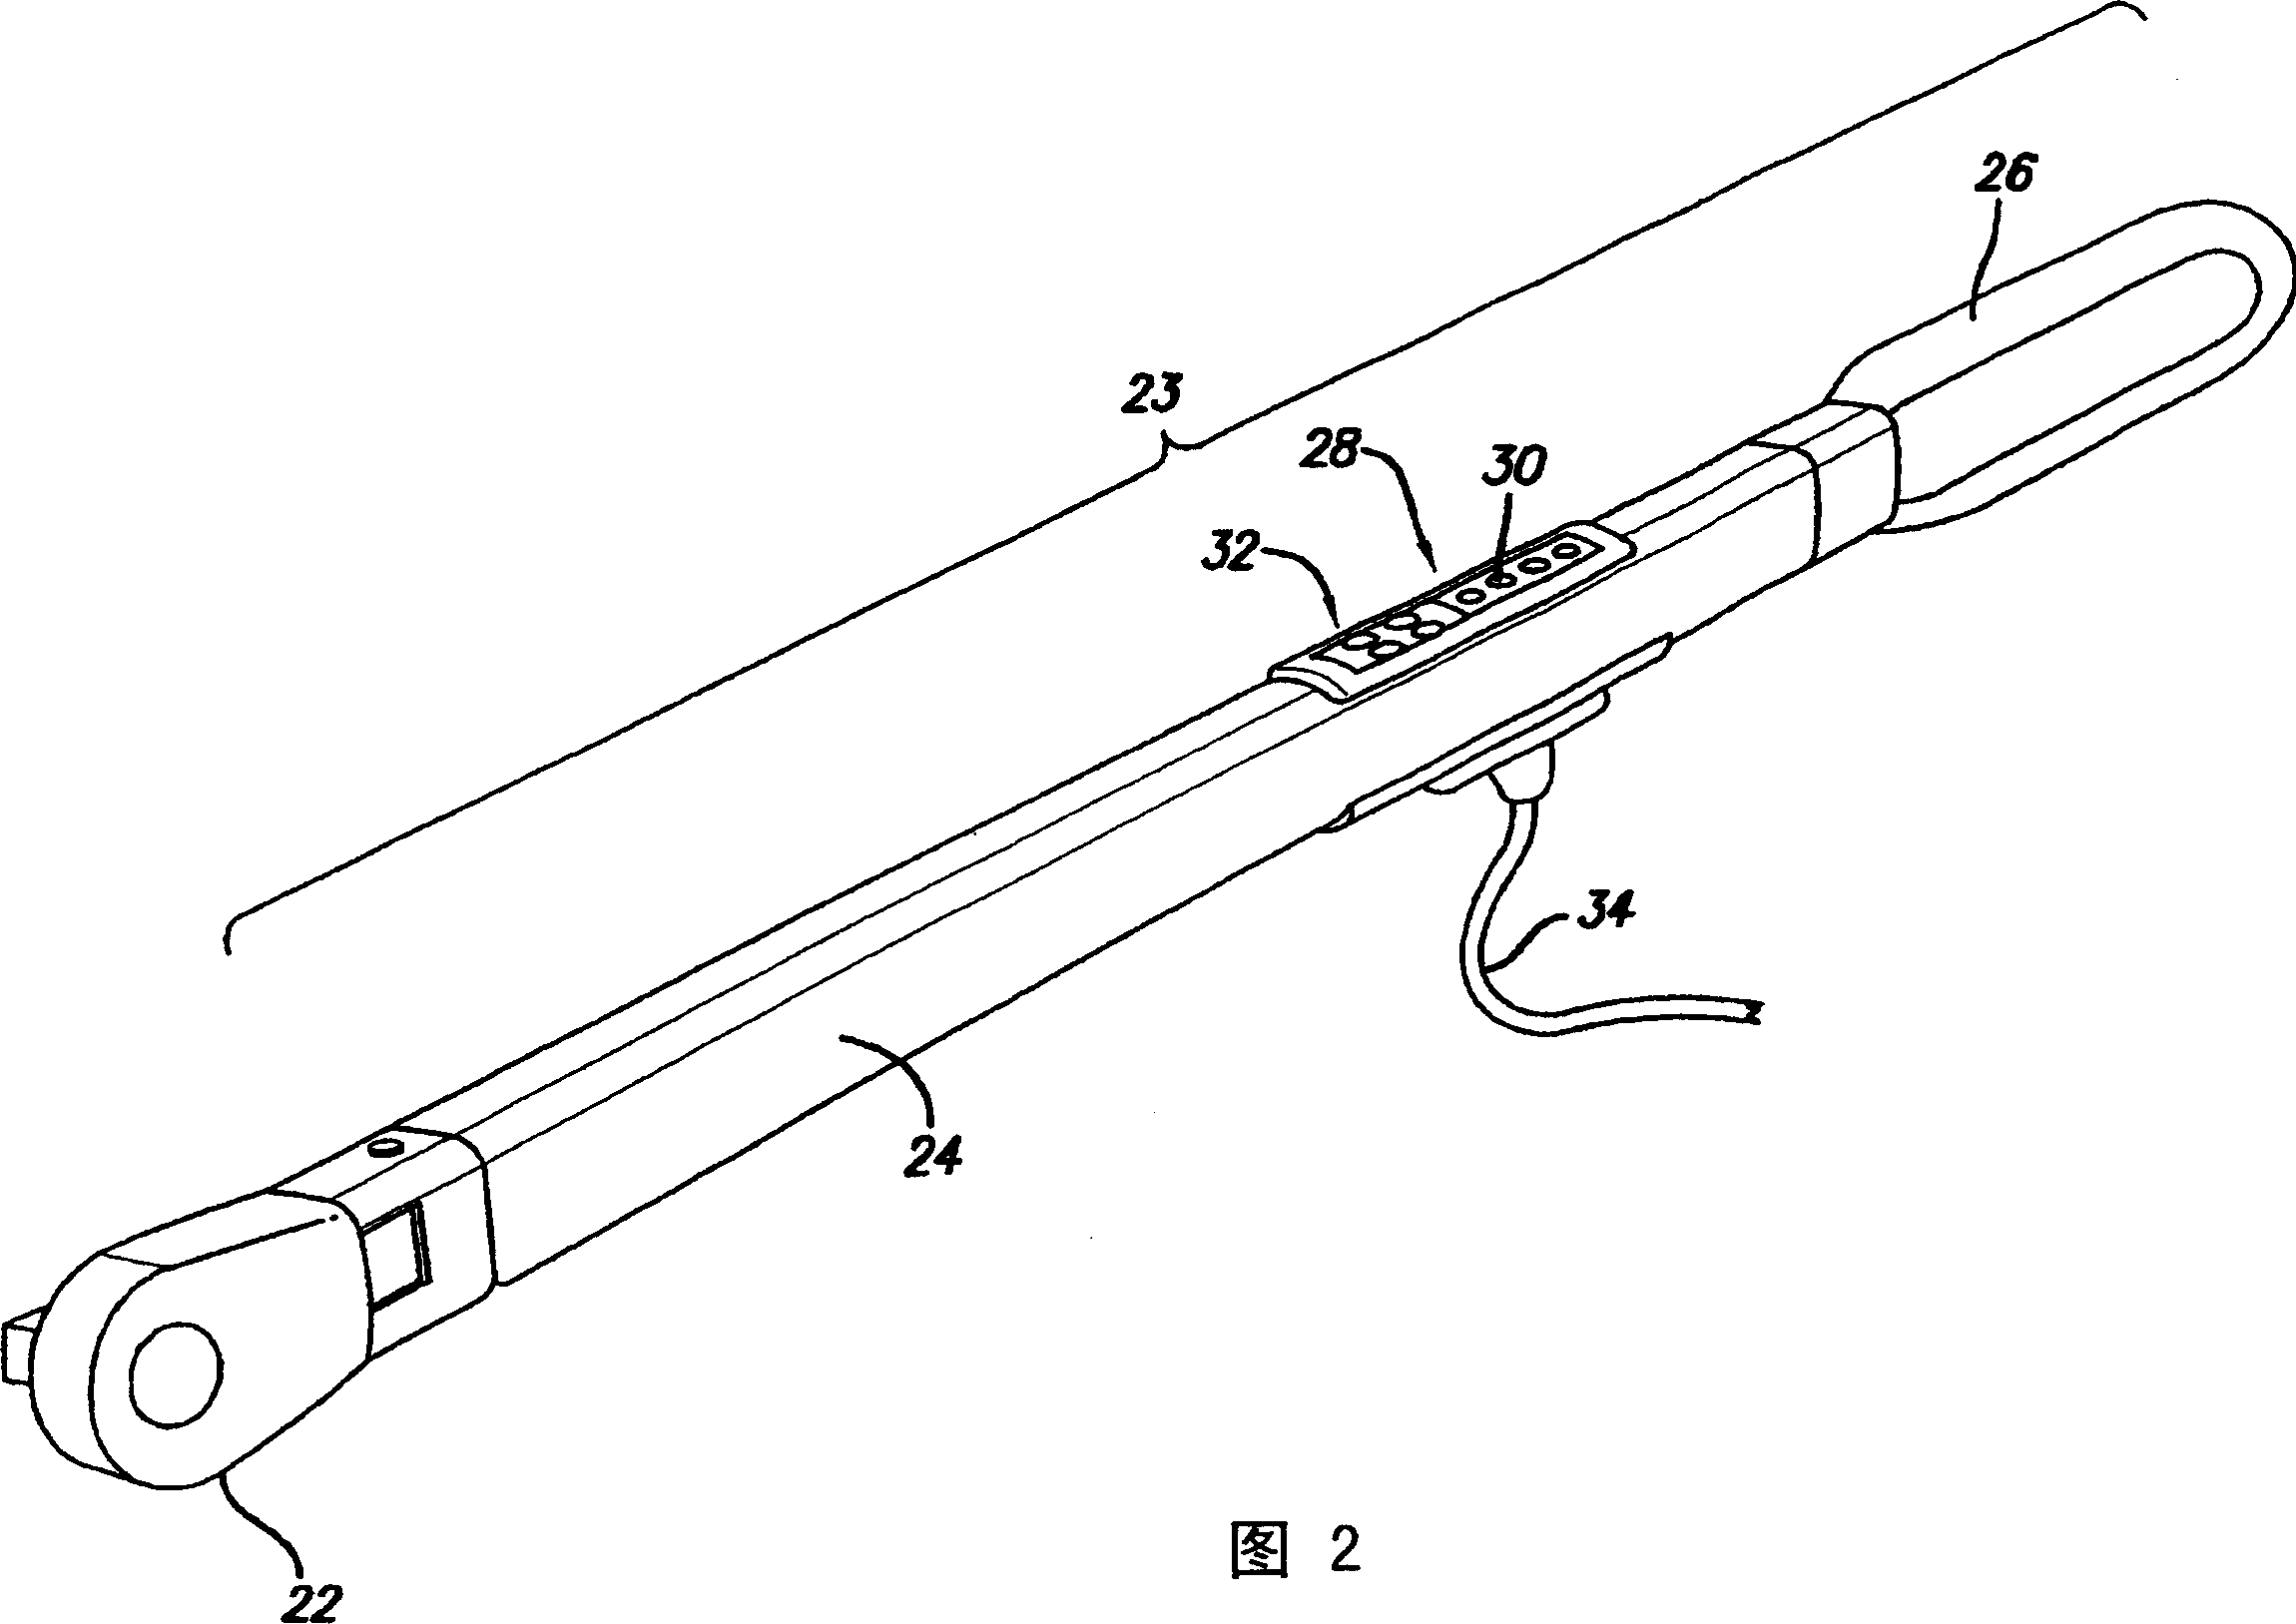 Tool apparatus, system and method of use